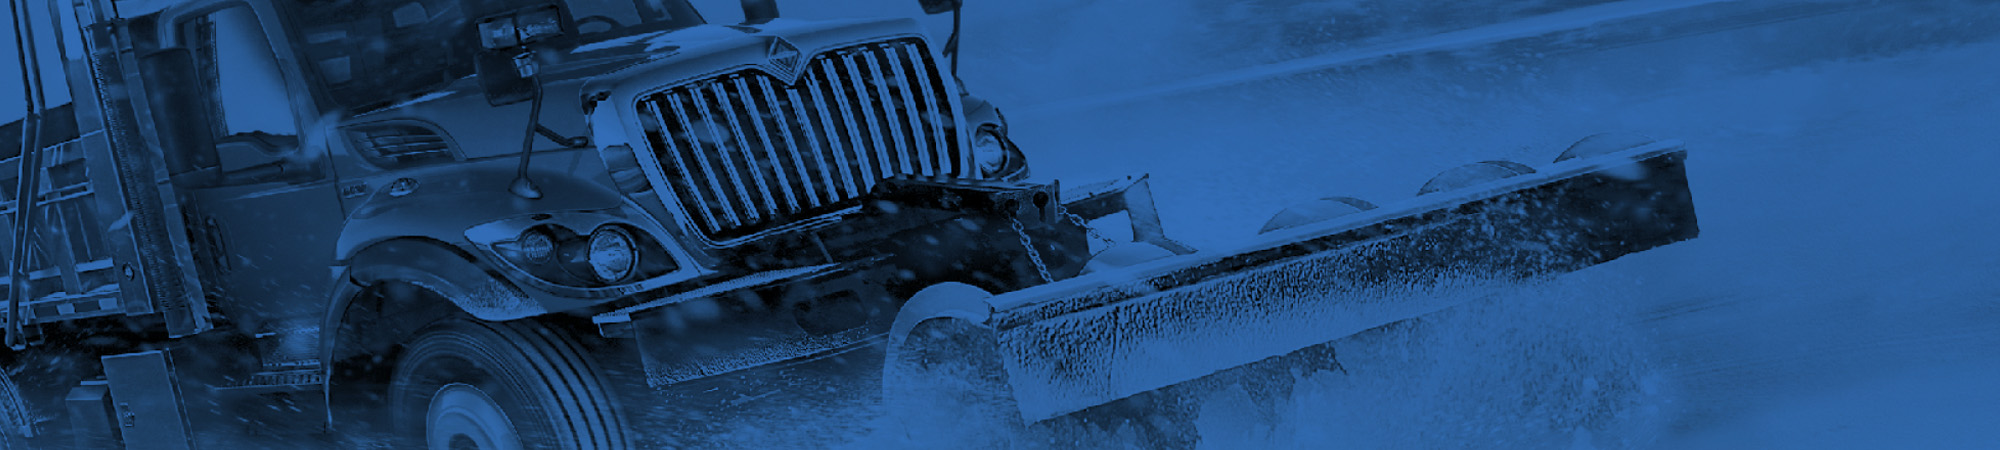 image with a semi plow truck with a diesel engine